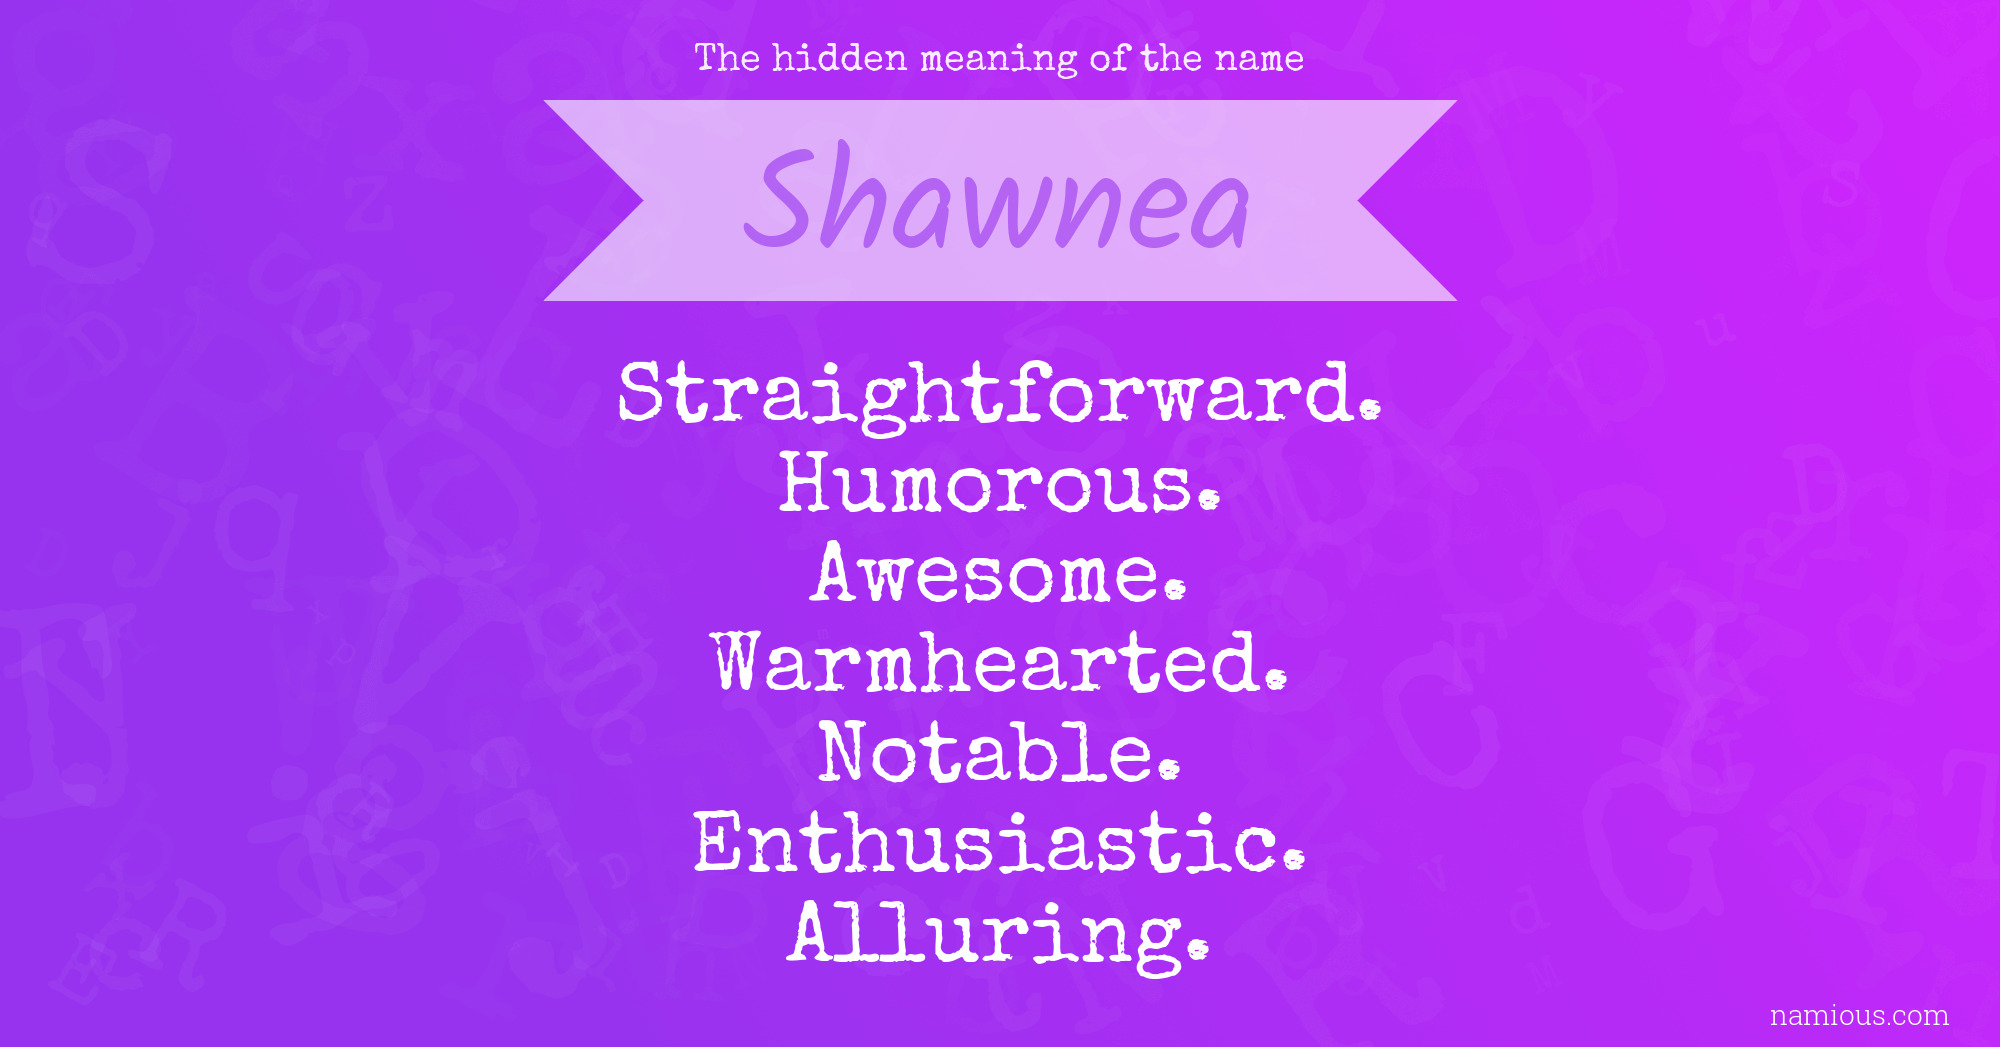 The hidden meaning of the name Shawnea